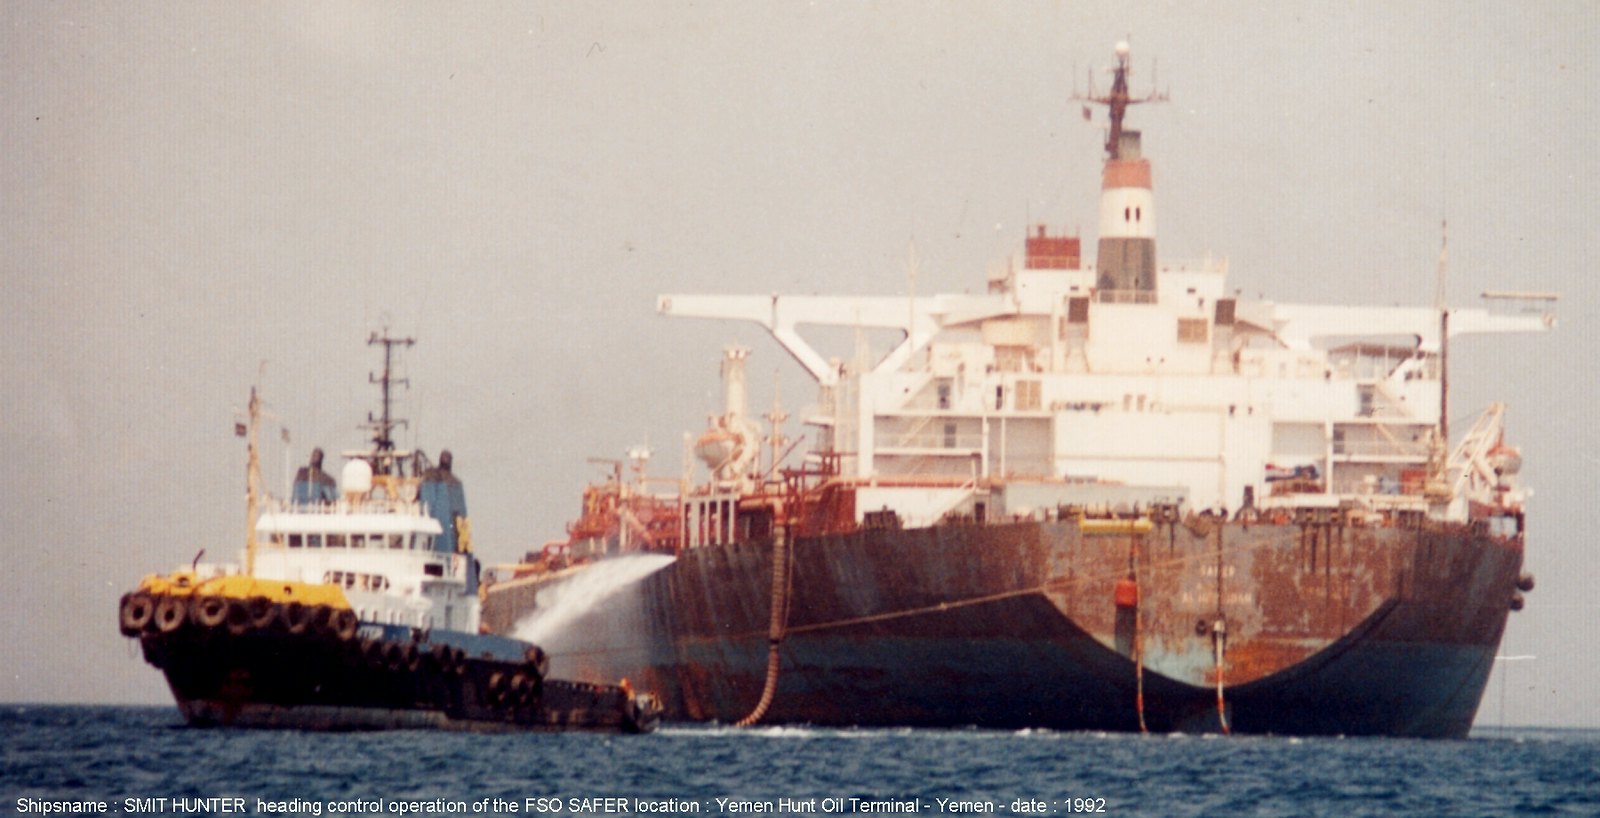 A 1992 file photo of FSO Safer off the coast of Yemen (by Maasmond Maritime/Piet Sinke CC BY-NC-SA 2.0via Flickr).